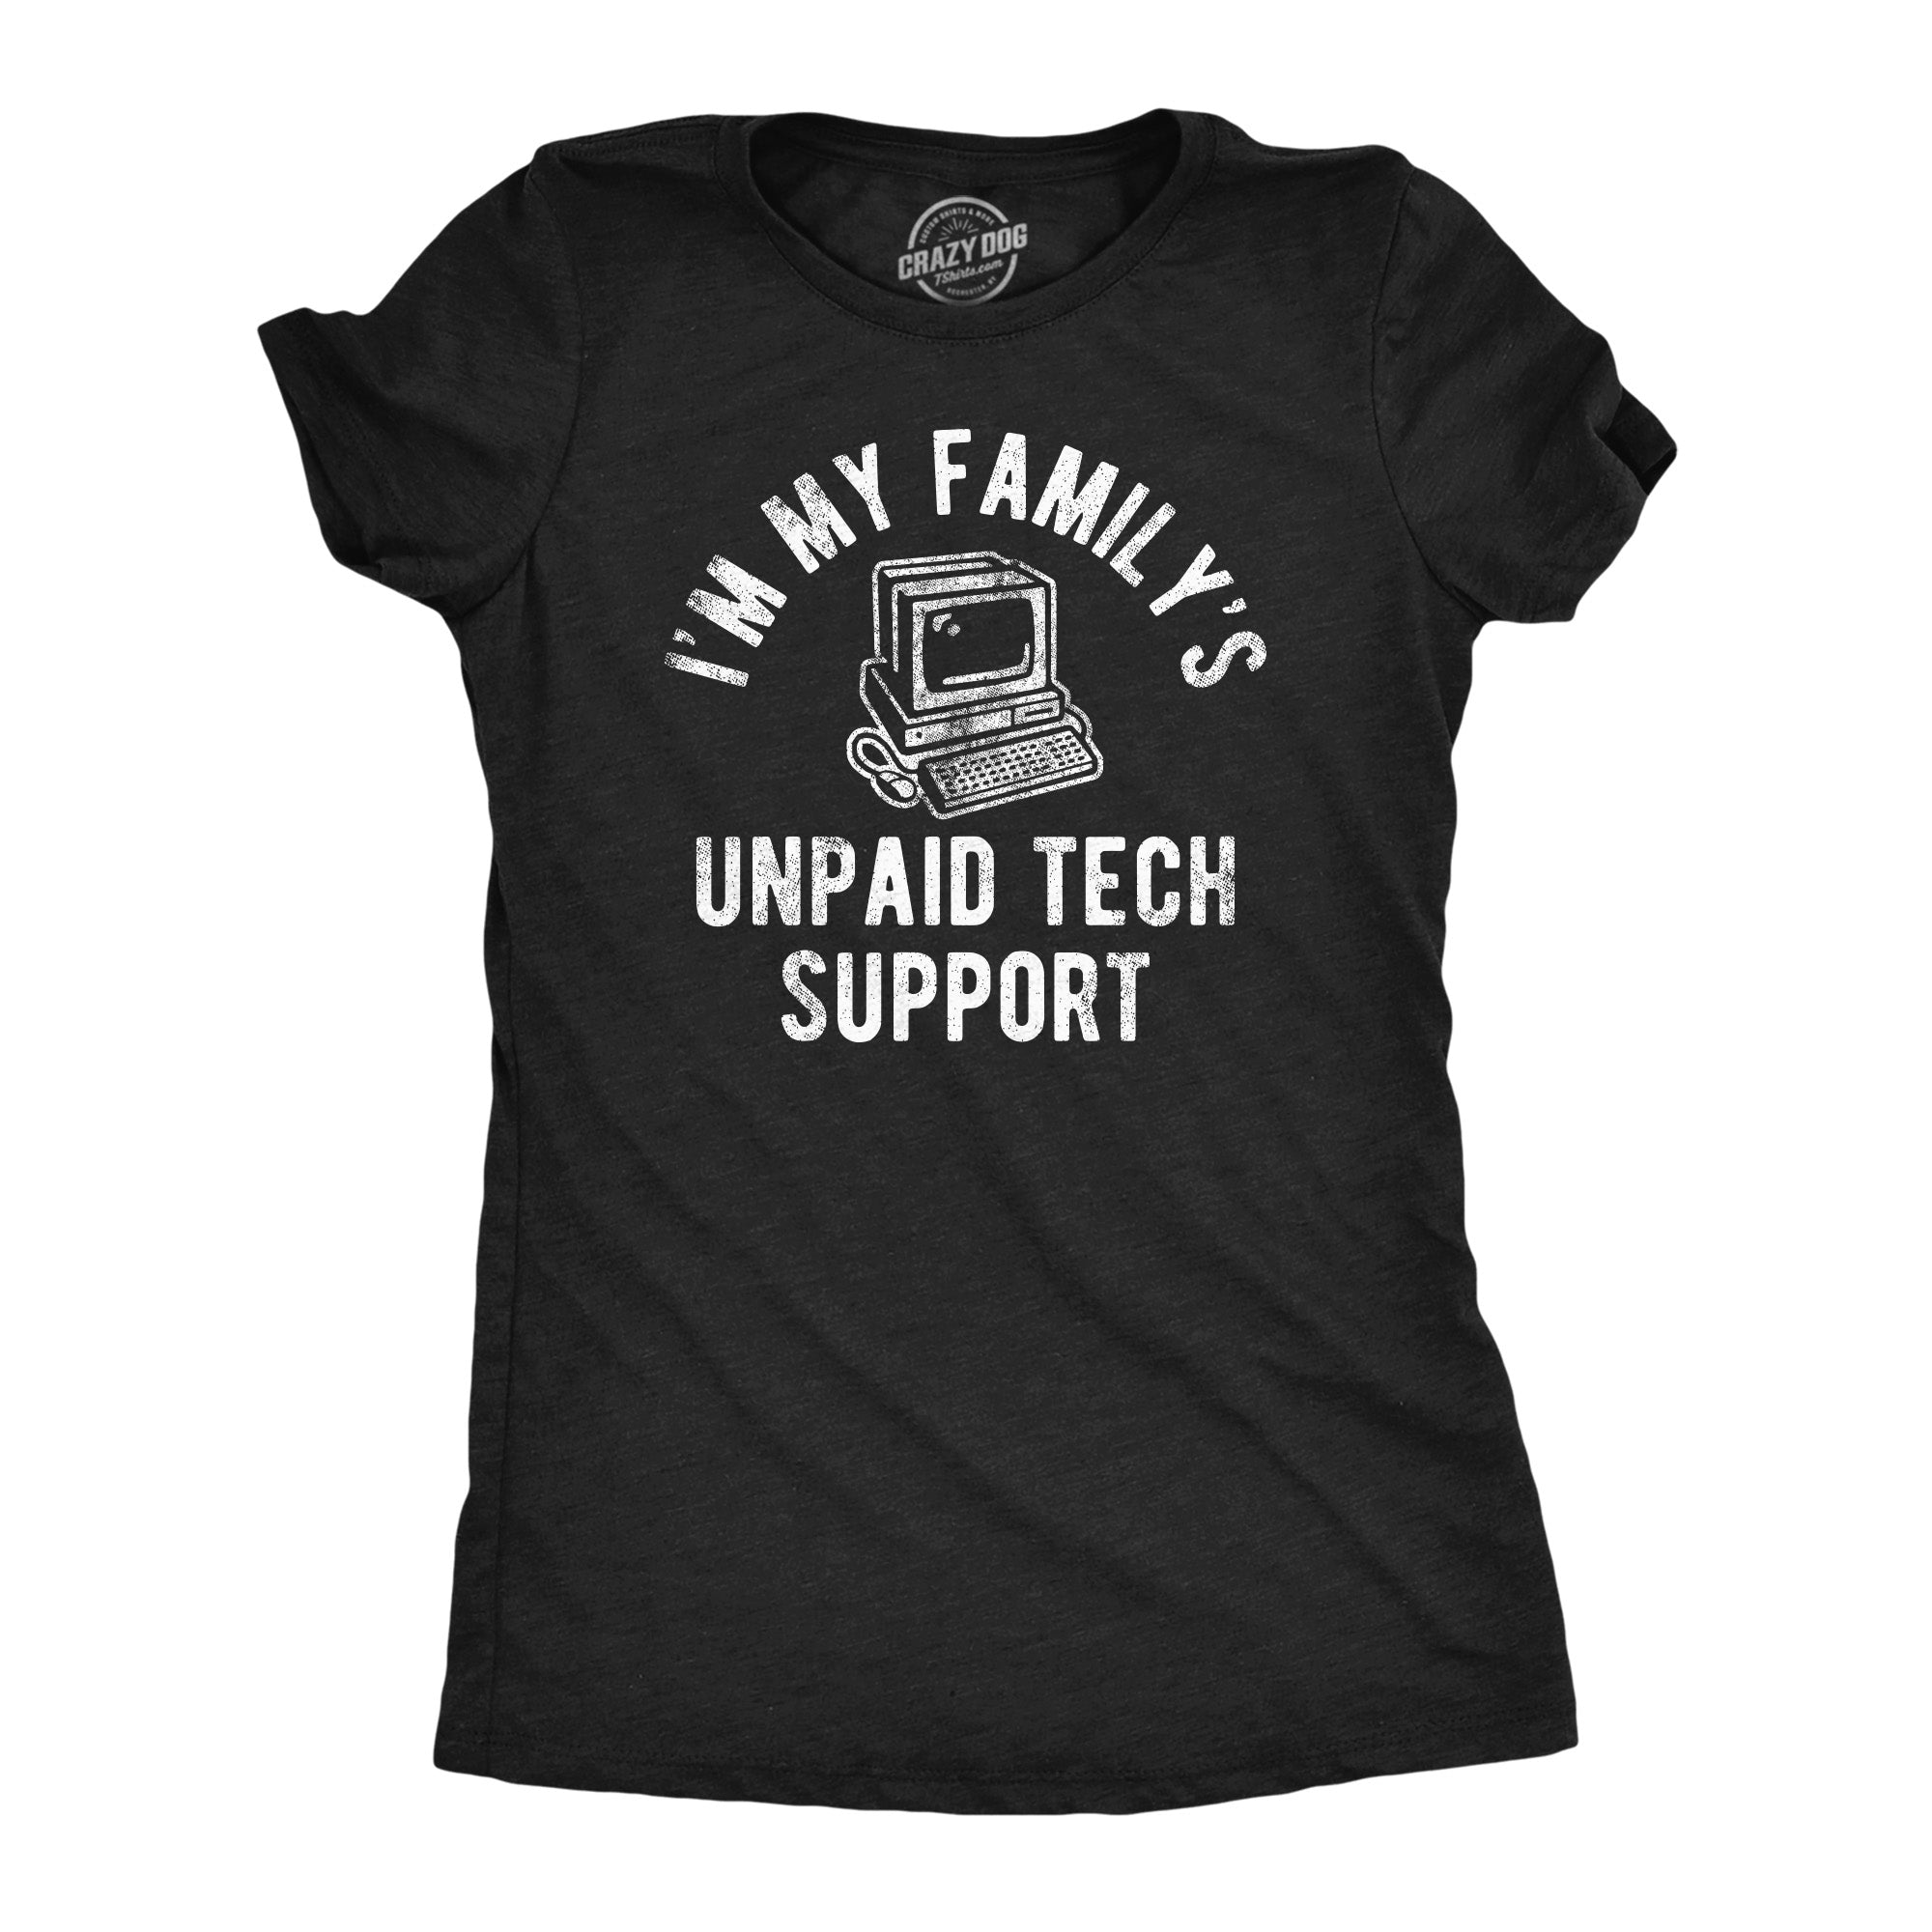 Funny Heather Black - Unpaid Tech Support Im My Familys Unpaid Tech Support Womens T Shirt Nerdy sarcastic nerdy Tee